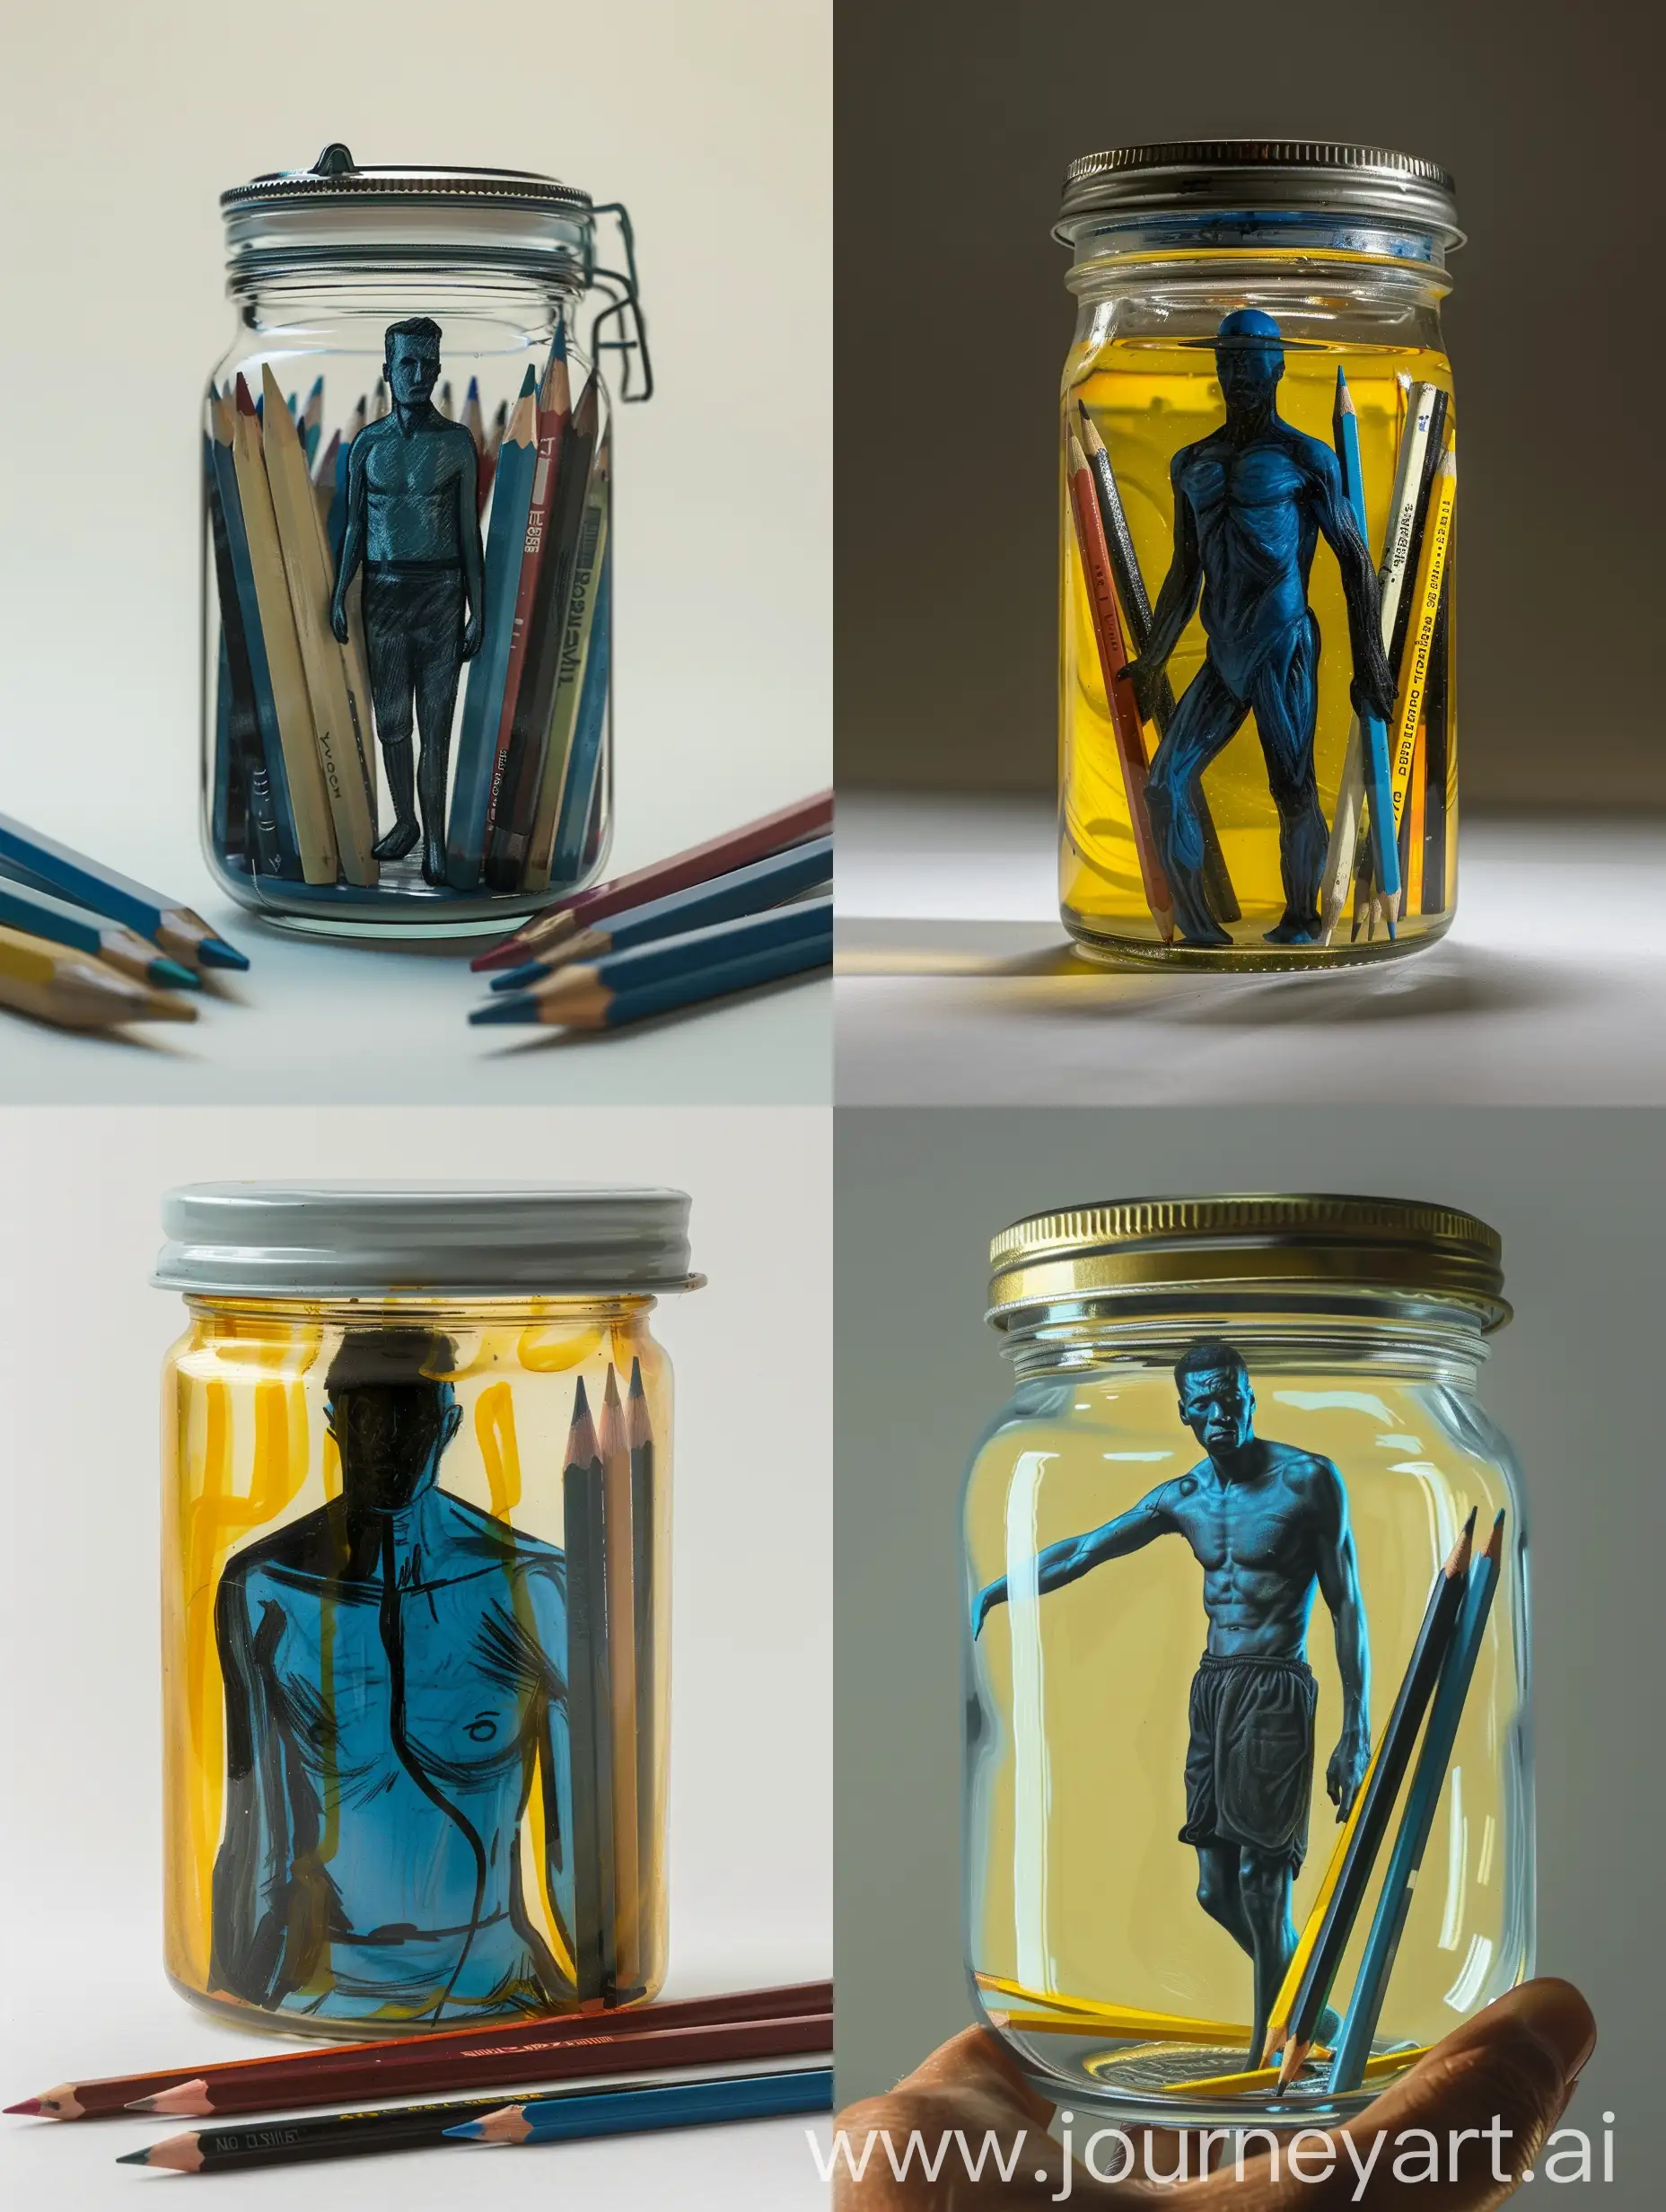 Blue-and-Black-Man-in-a-Jar-with-Pencils